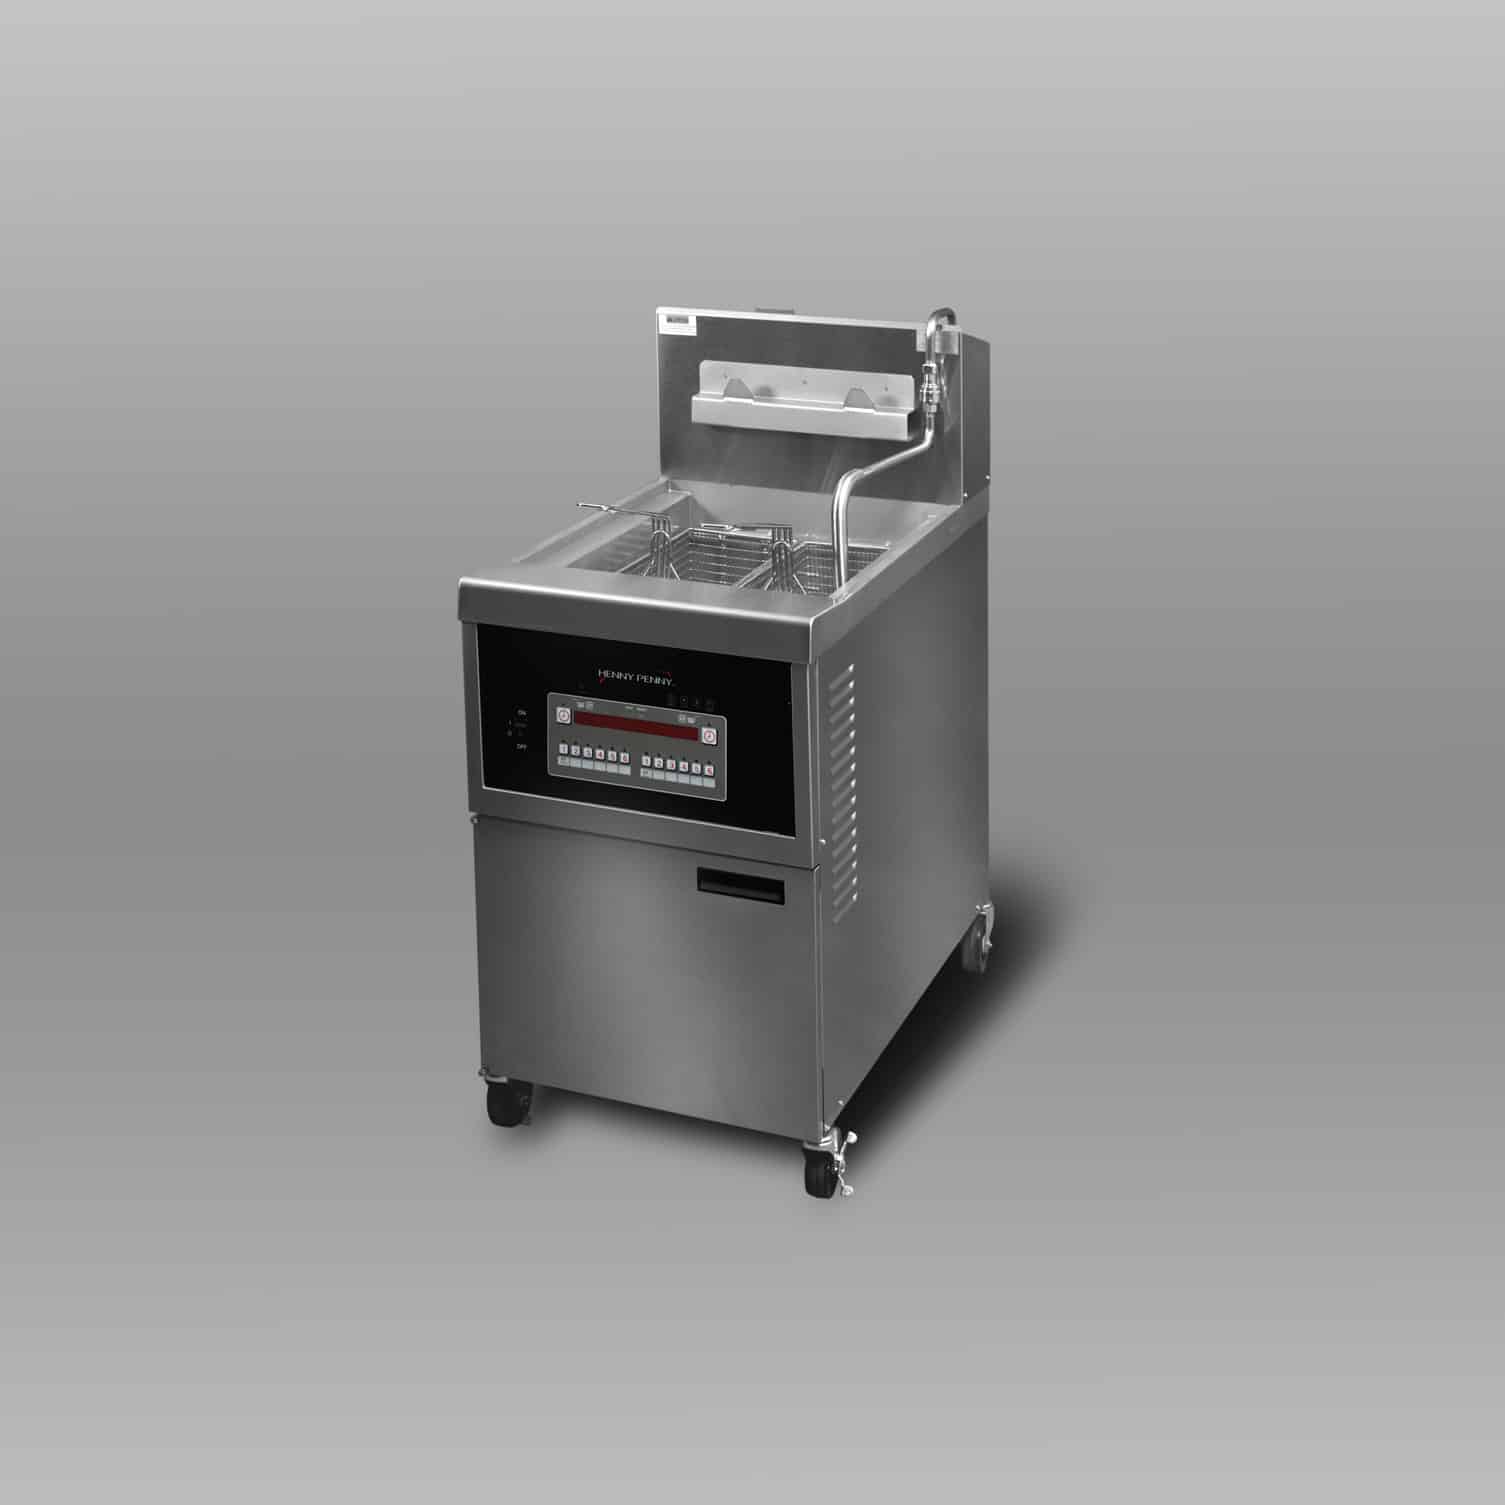 How to filter your 340 series Henny Penny Fryer